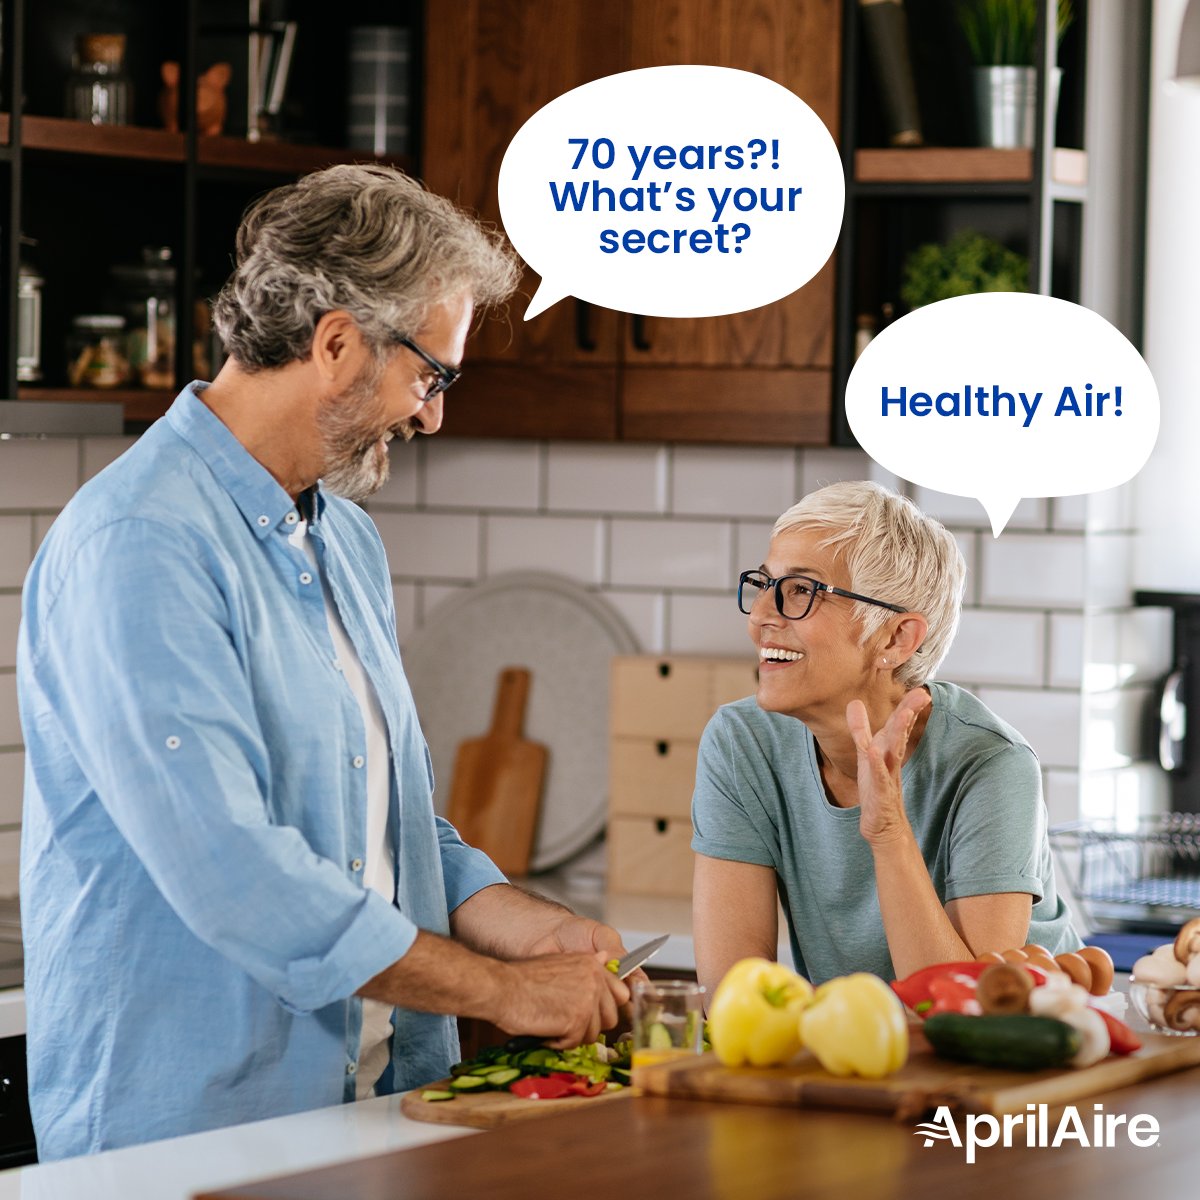 1 in 3 Americans suffer from heart disease, but we’re going to let you in on a secret—you can improve your heart health with #HealthyAir!​ For 70 years, AprilAire Pros have been delivering Healthy Air to homes, and now it’s your turn. Find a pro near you. bit.ly/3xjbpEj